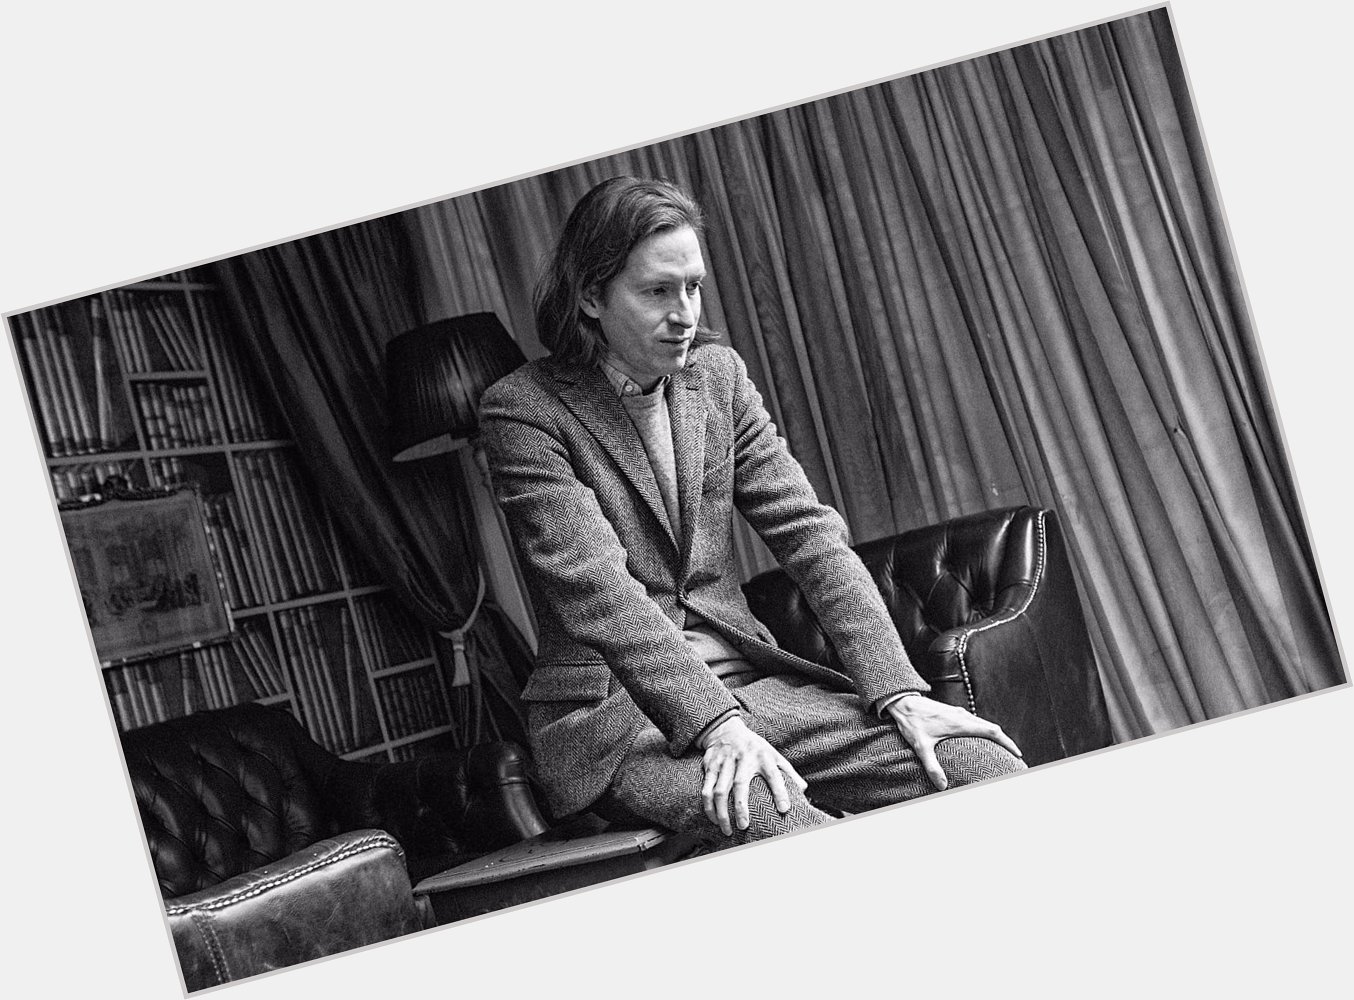 Happy birthday to one of my favorite directors of all time, Wes Anderson  